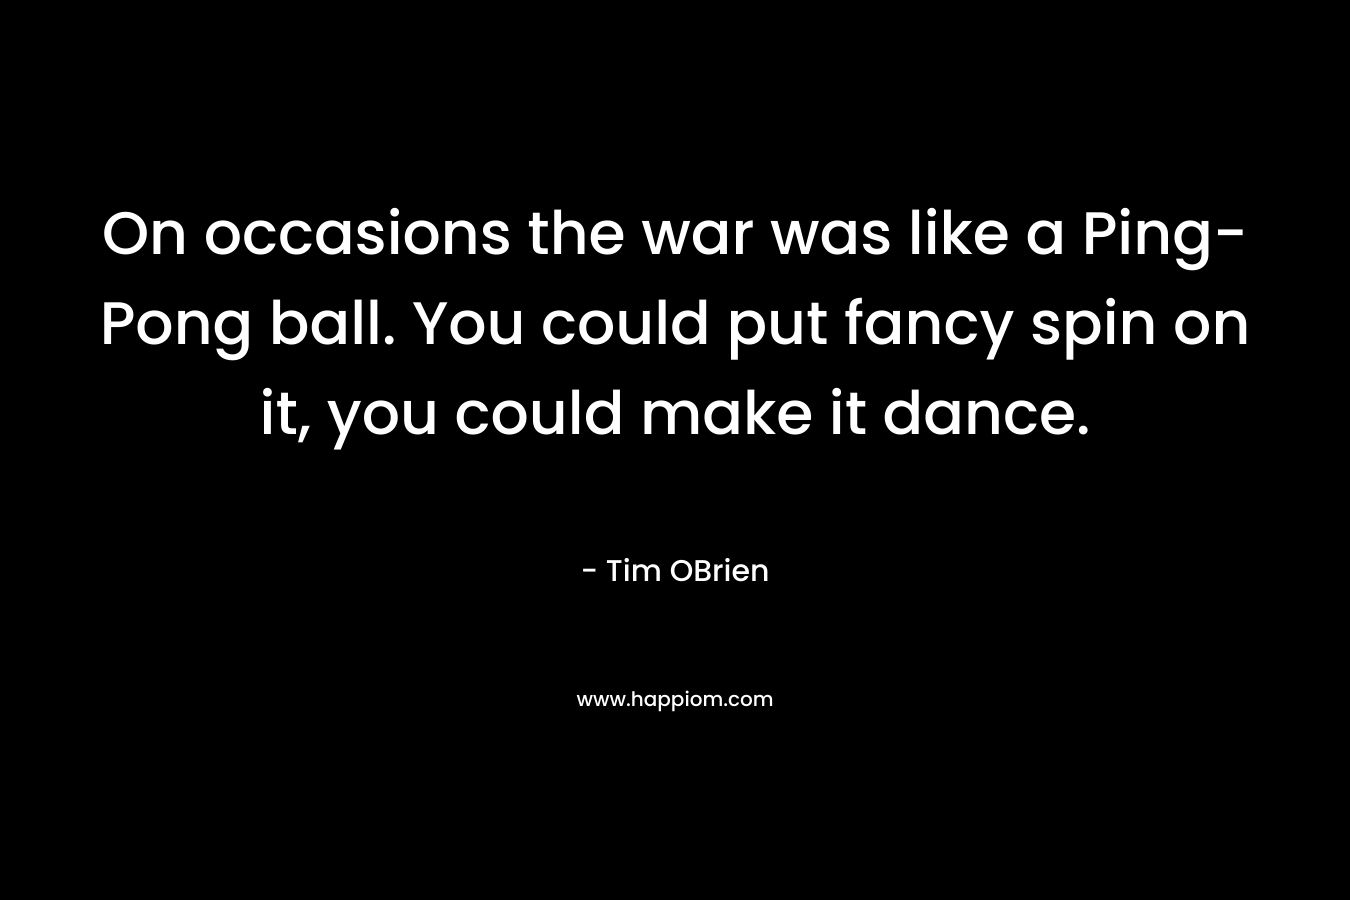 On occasions the war was like a Ping-Pong ball. You could put fancy spin on it, you could make it dance.